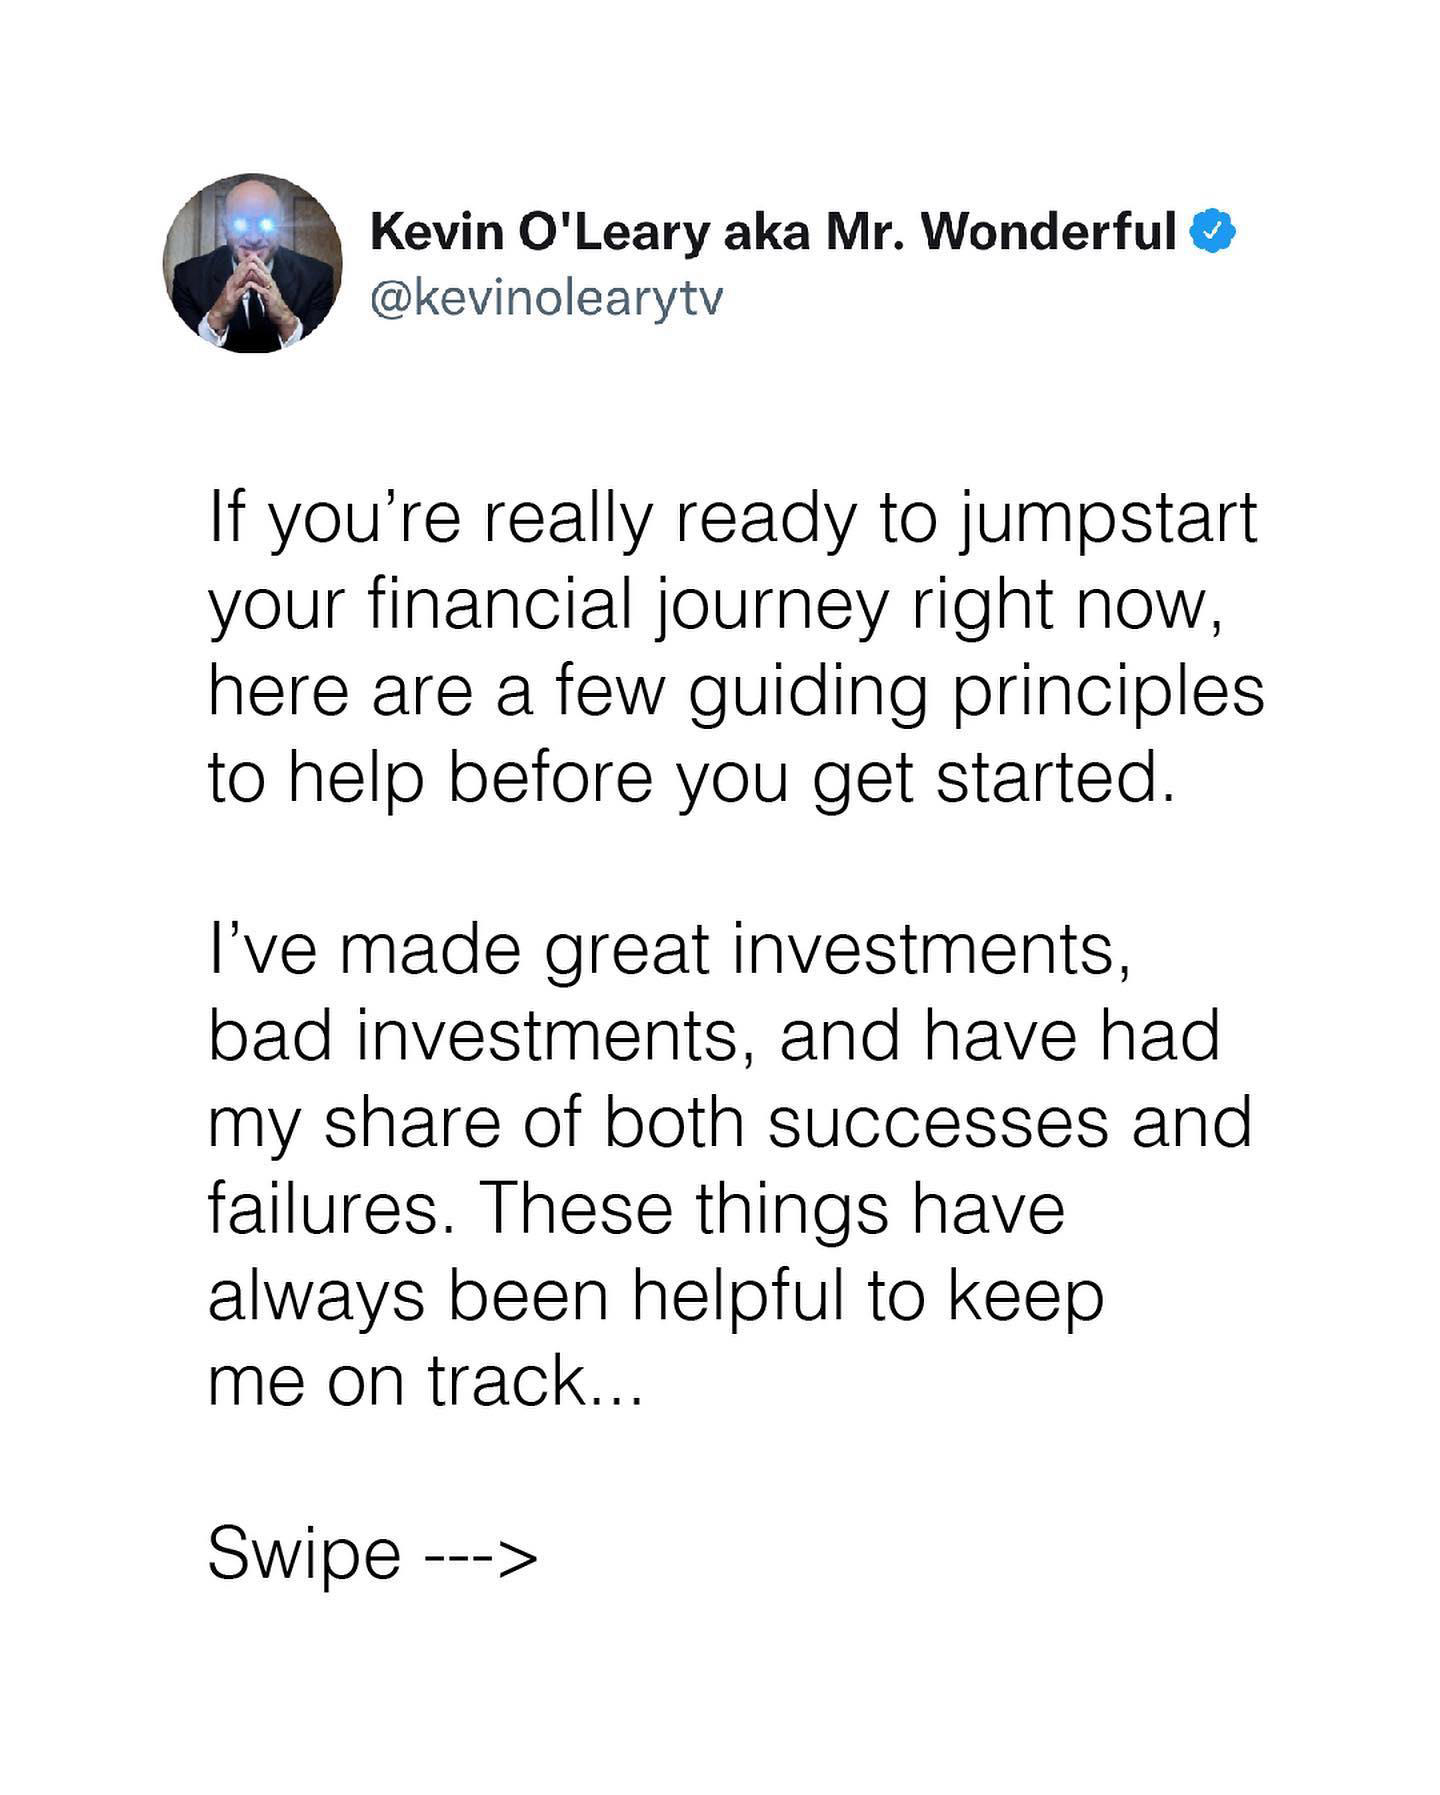 image  1 Kevin O'Leary - The truth is, savings and the right investments can turn you into a self-made millio